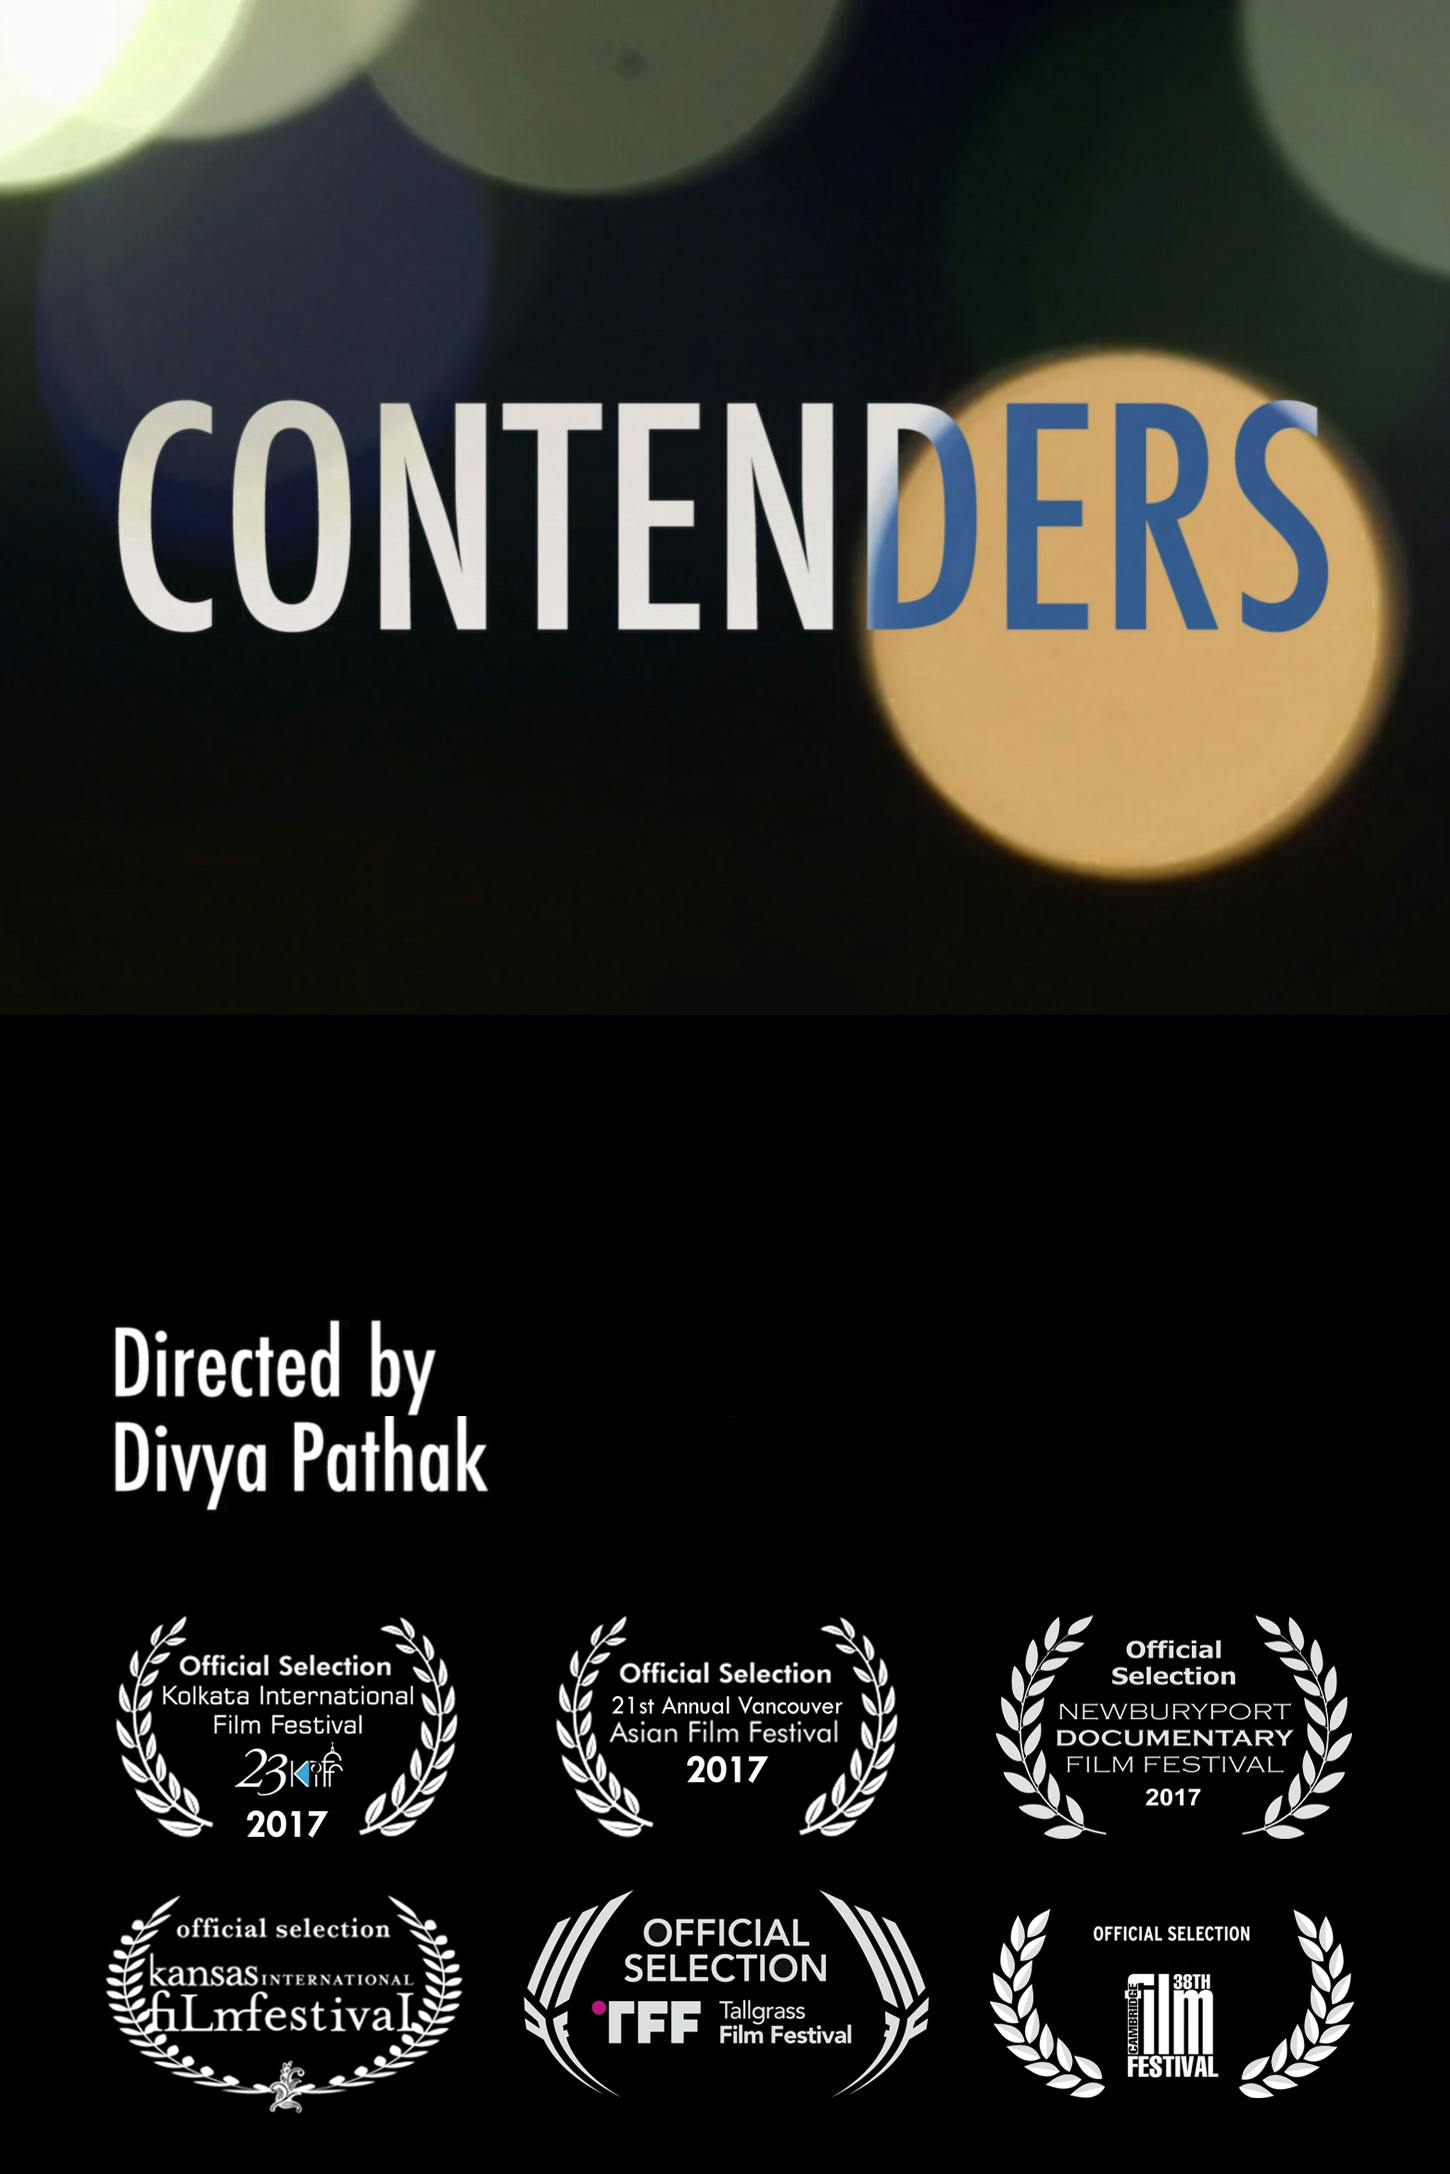 Movie poster for Contenders